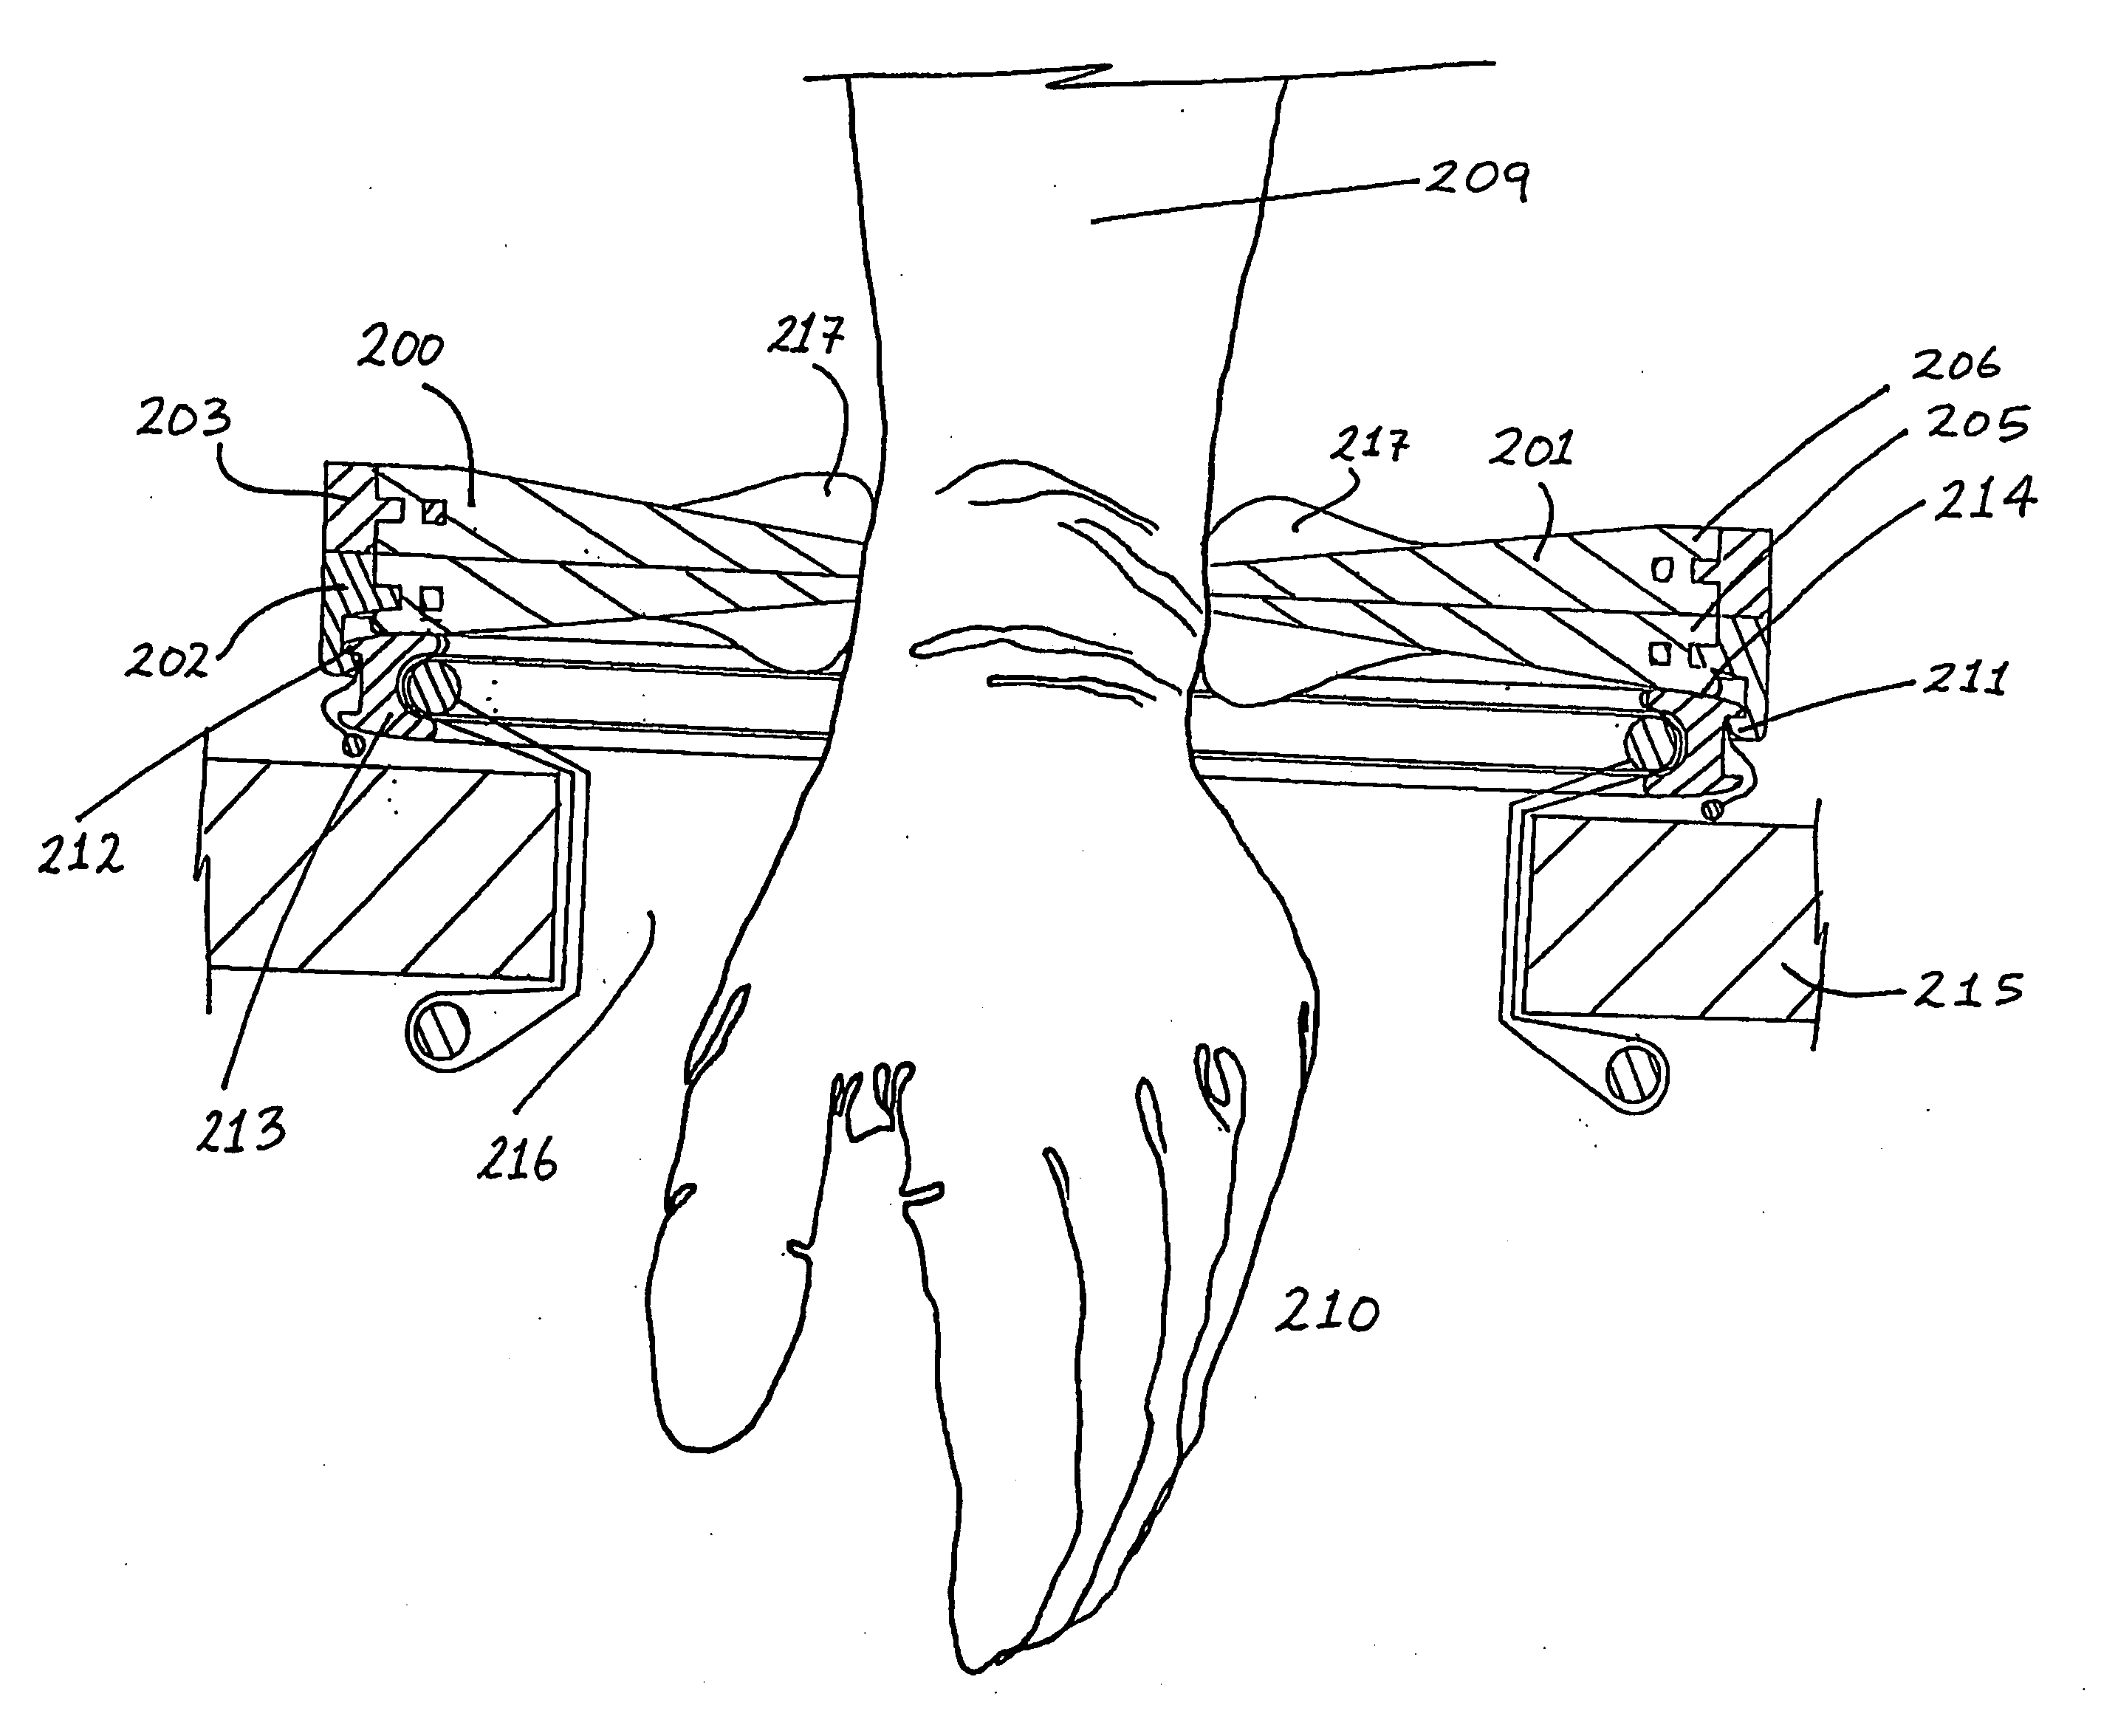 Surgical sealing device